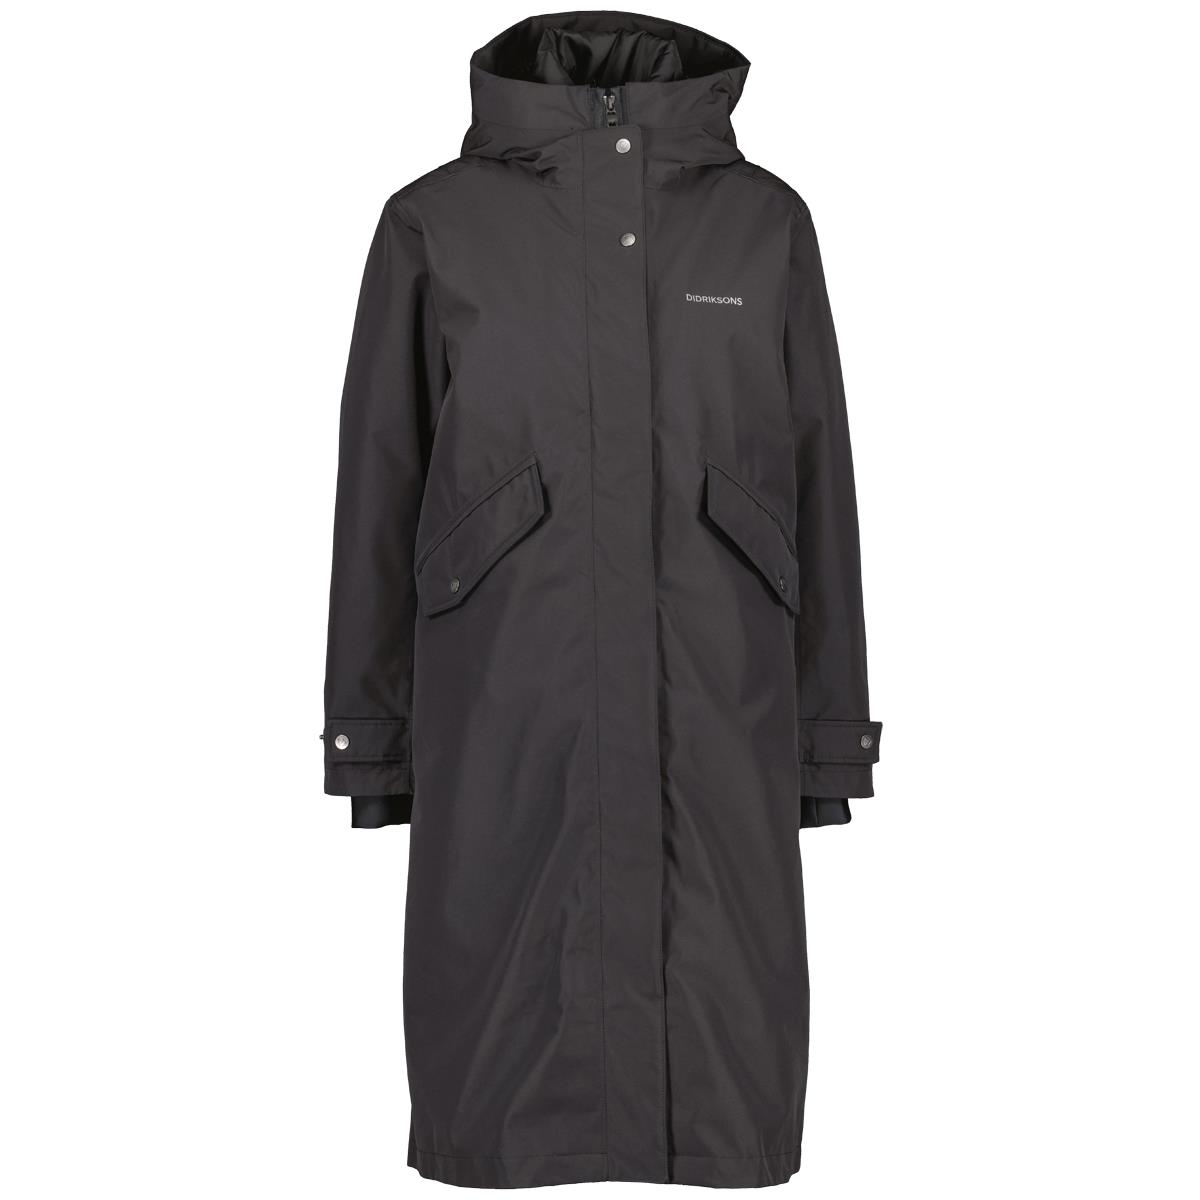 Could you specify the length of the Didriksons Mia Parka Jacket for women?